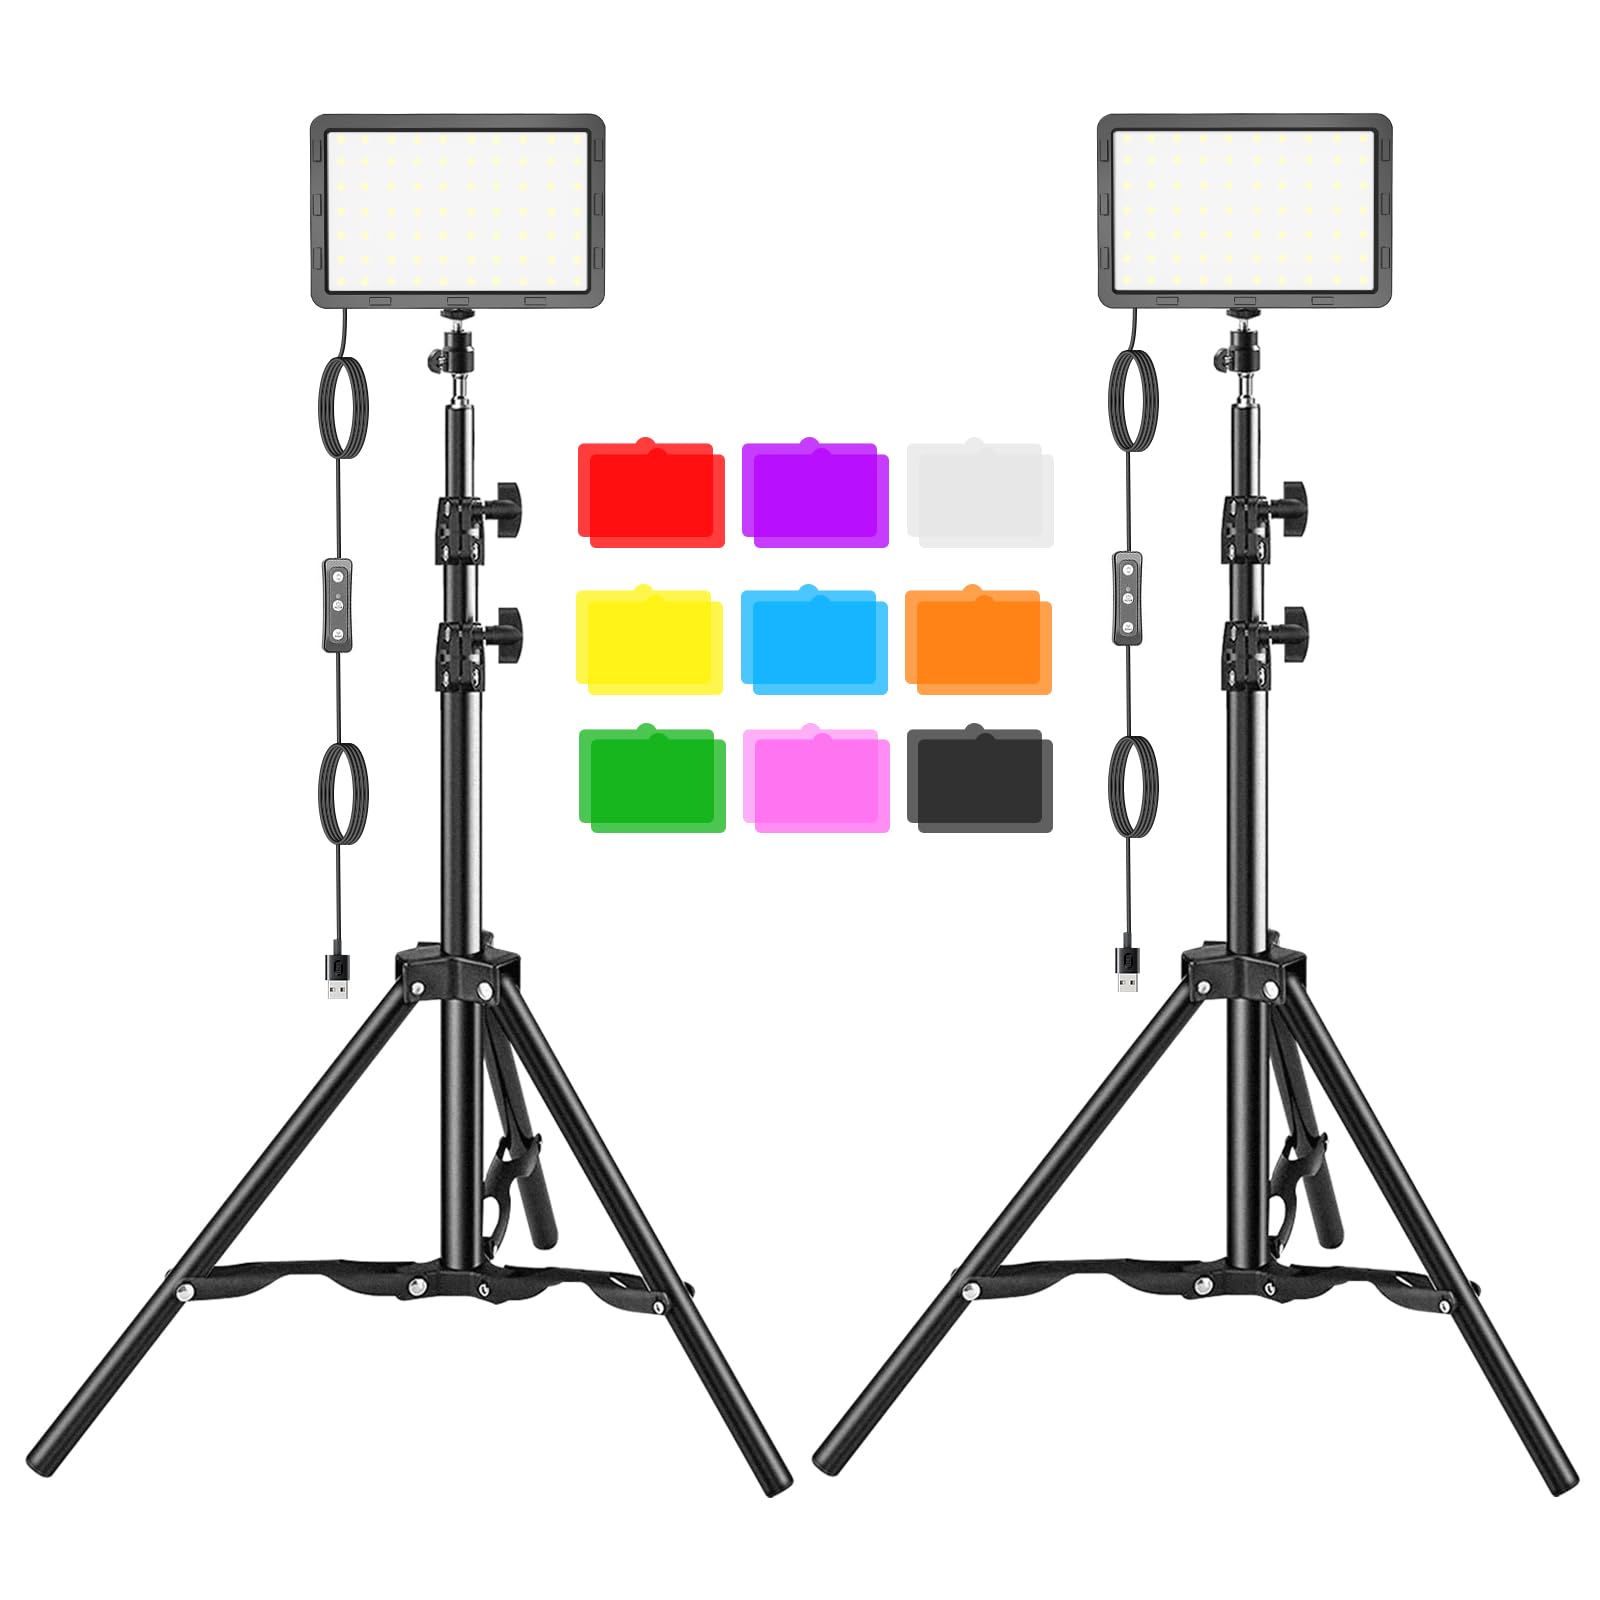 LED Video Light Kit 2Pcs, Hagibis Studio Lights 9 Color Filters for Photography Lighting with Adjustable Tripod Stand 55